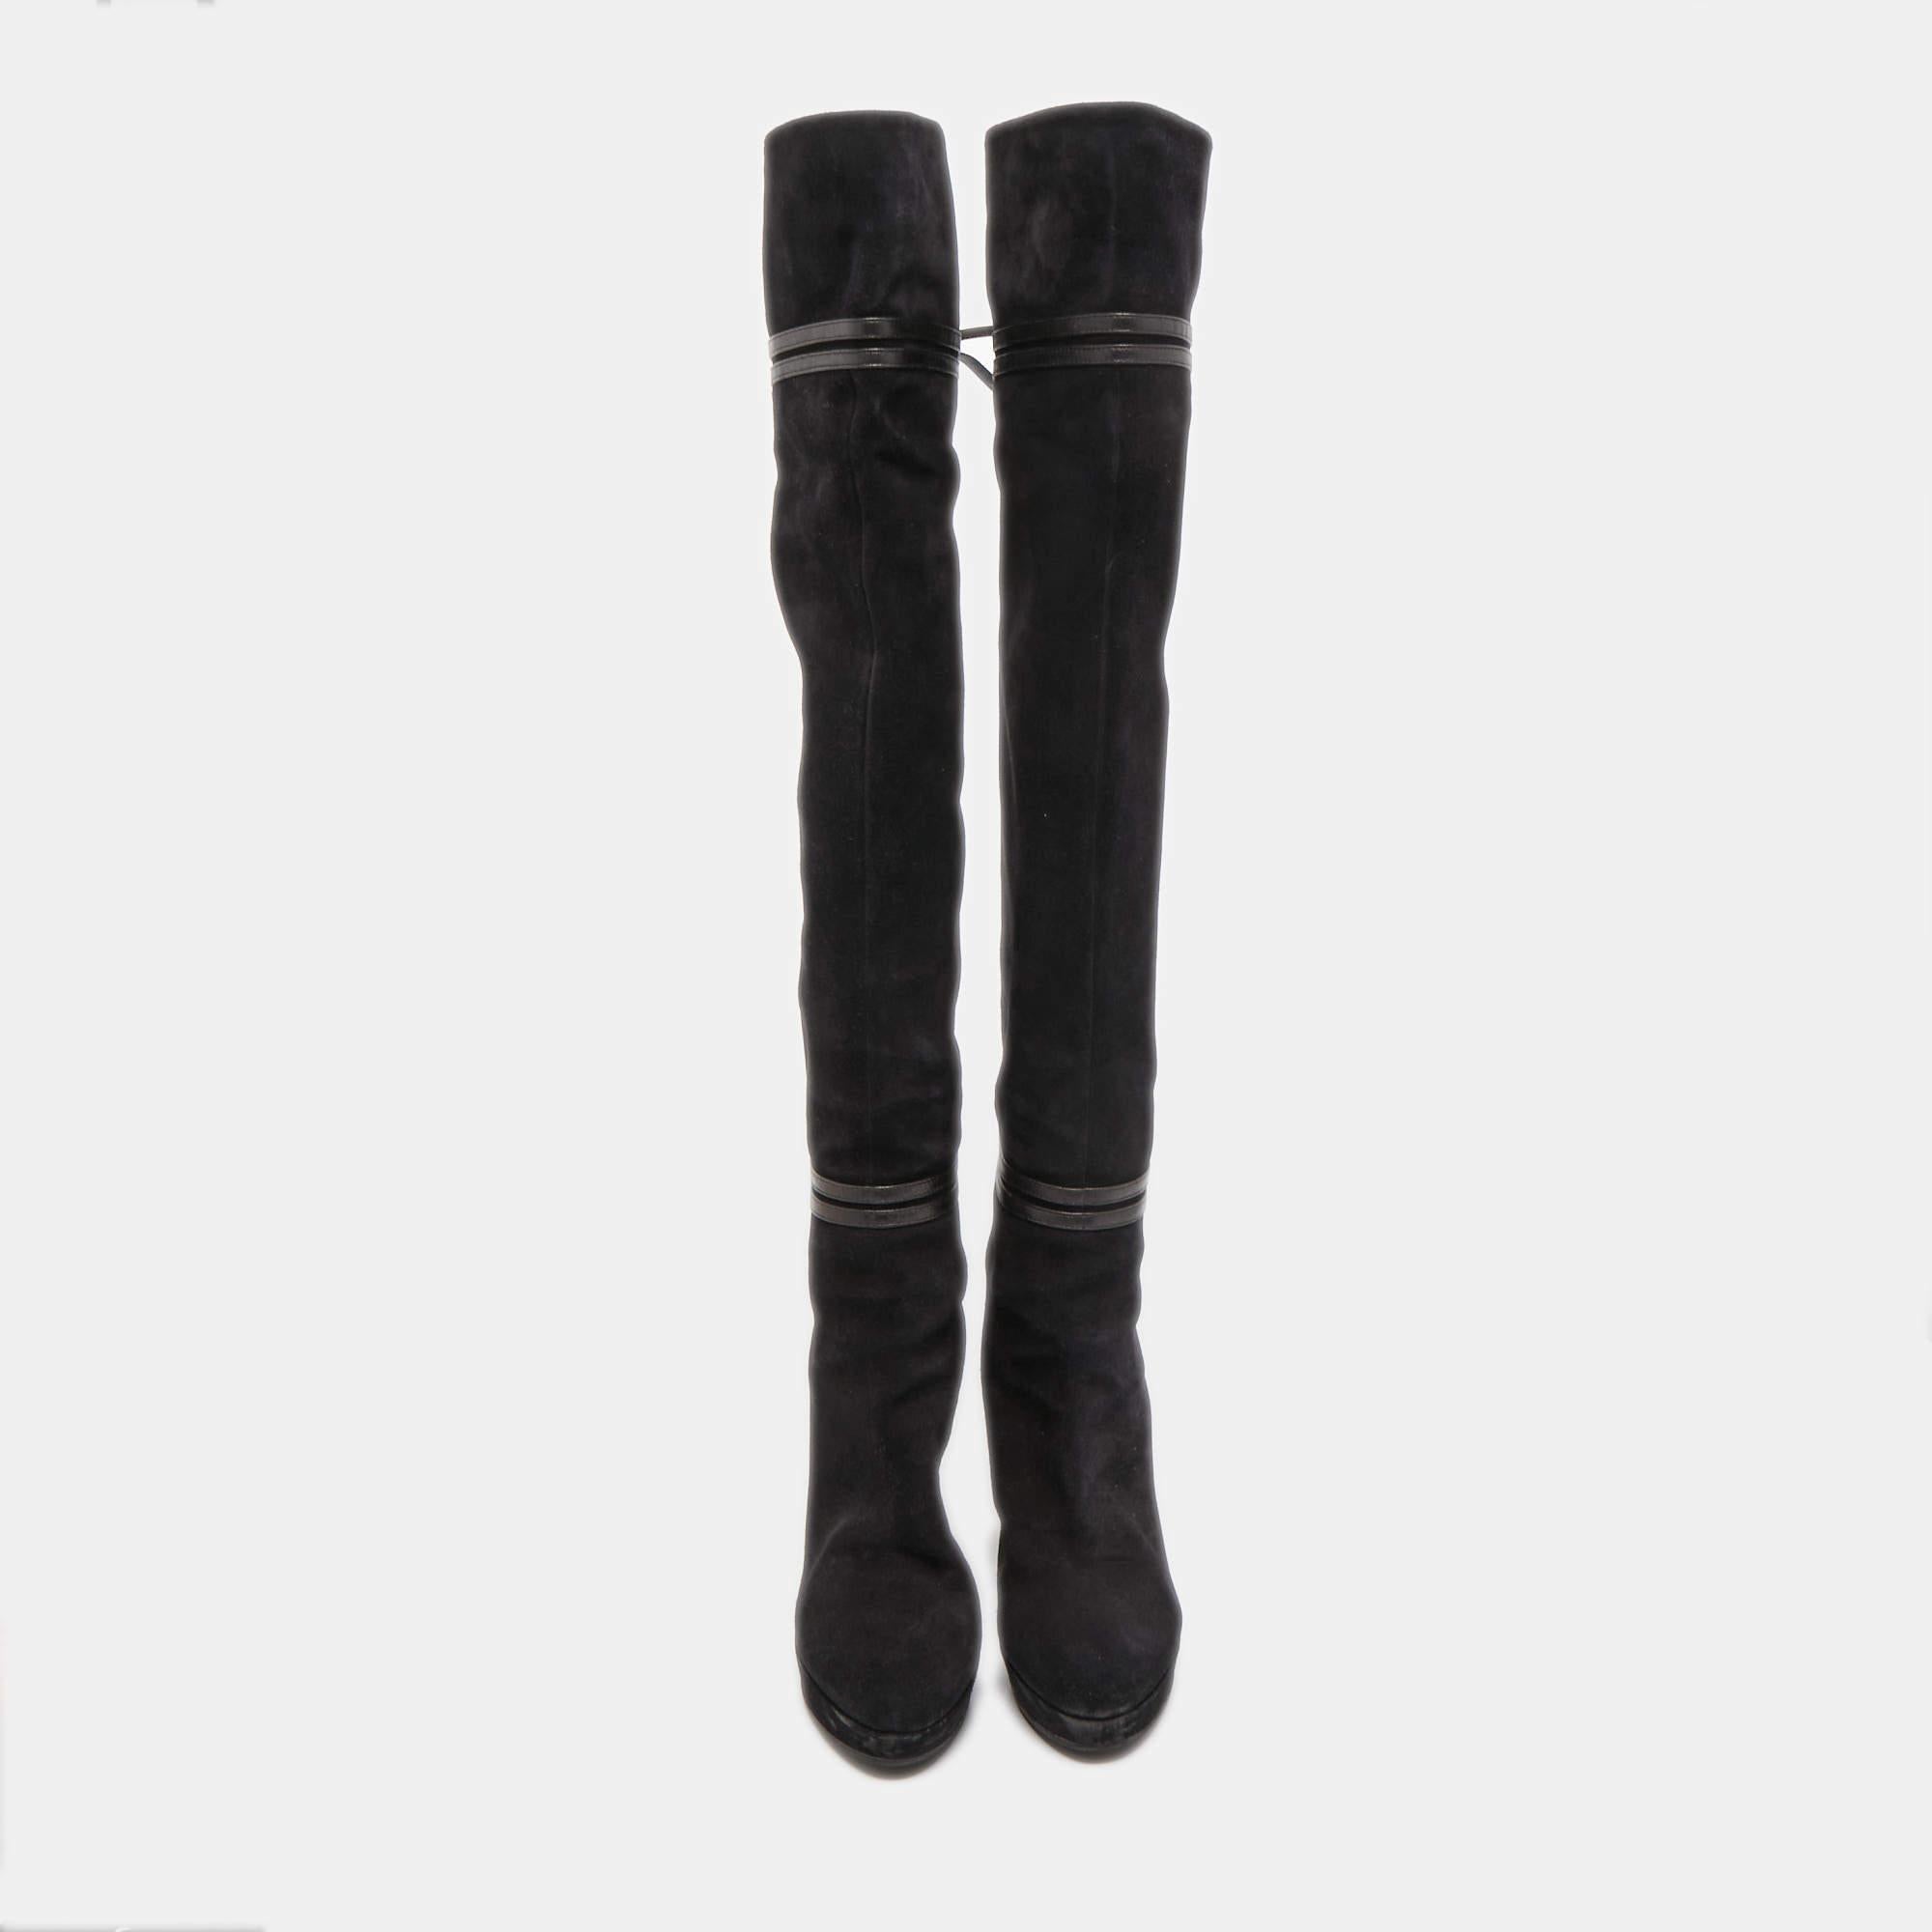 Gucci Black Suede and Leather Bow Over The Knee Boots Size 36.5 In Good Condition For Sale In Dubai, Al Qouz 2